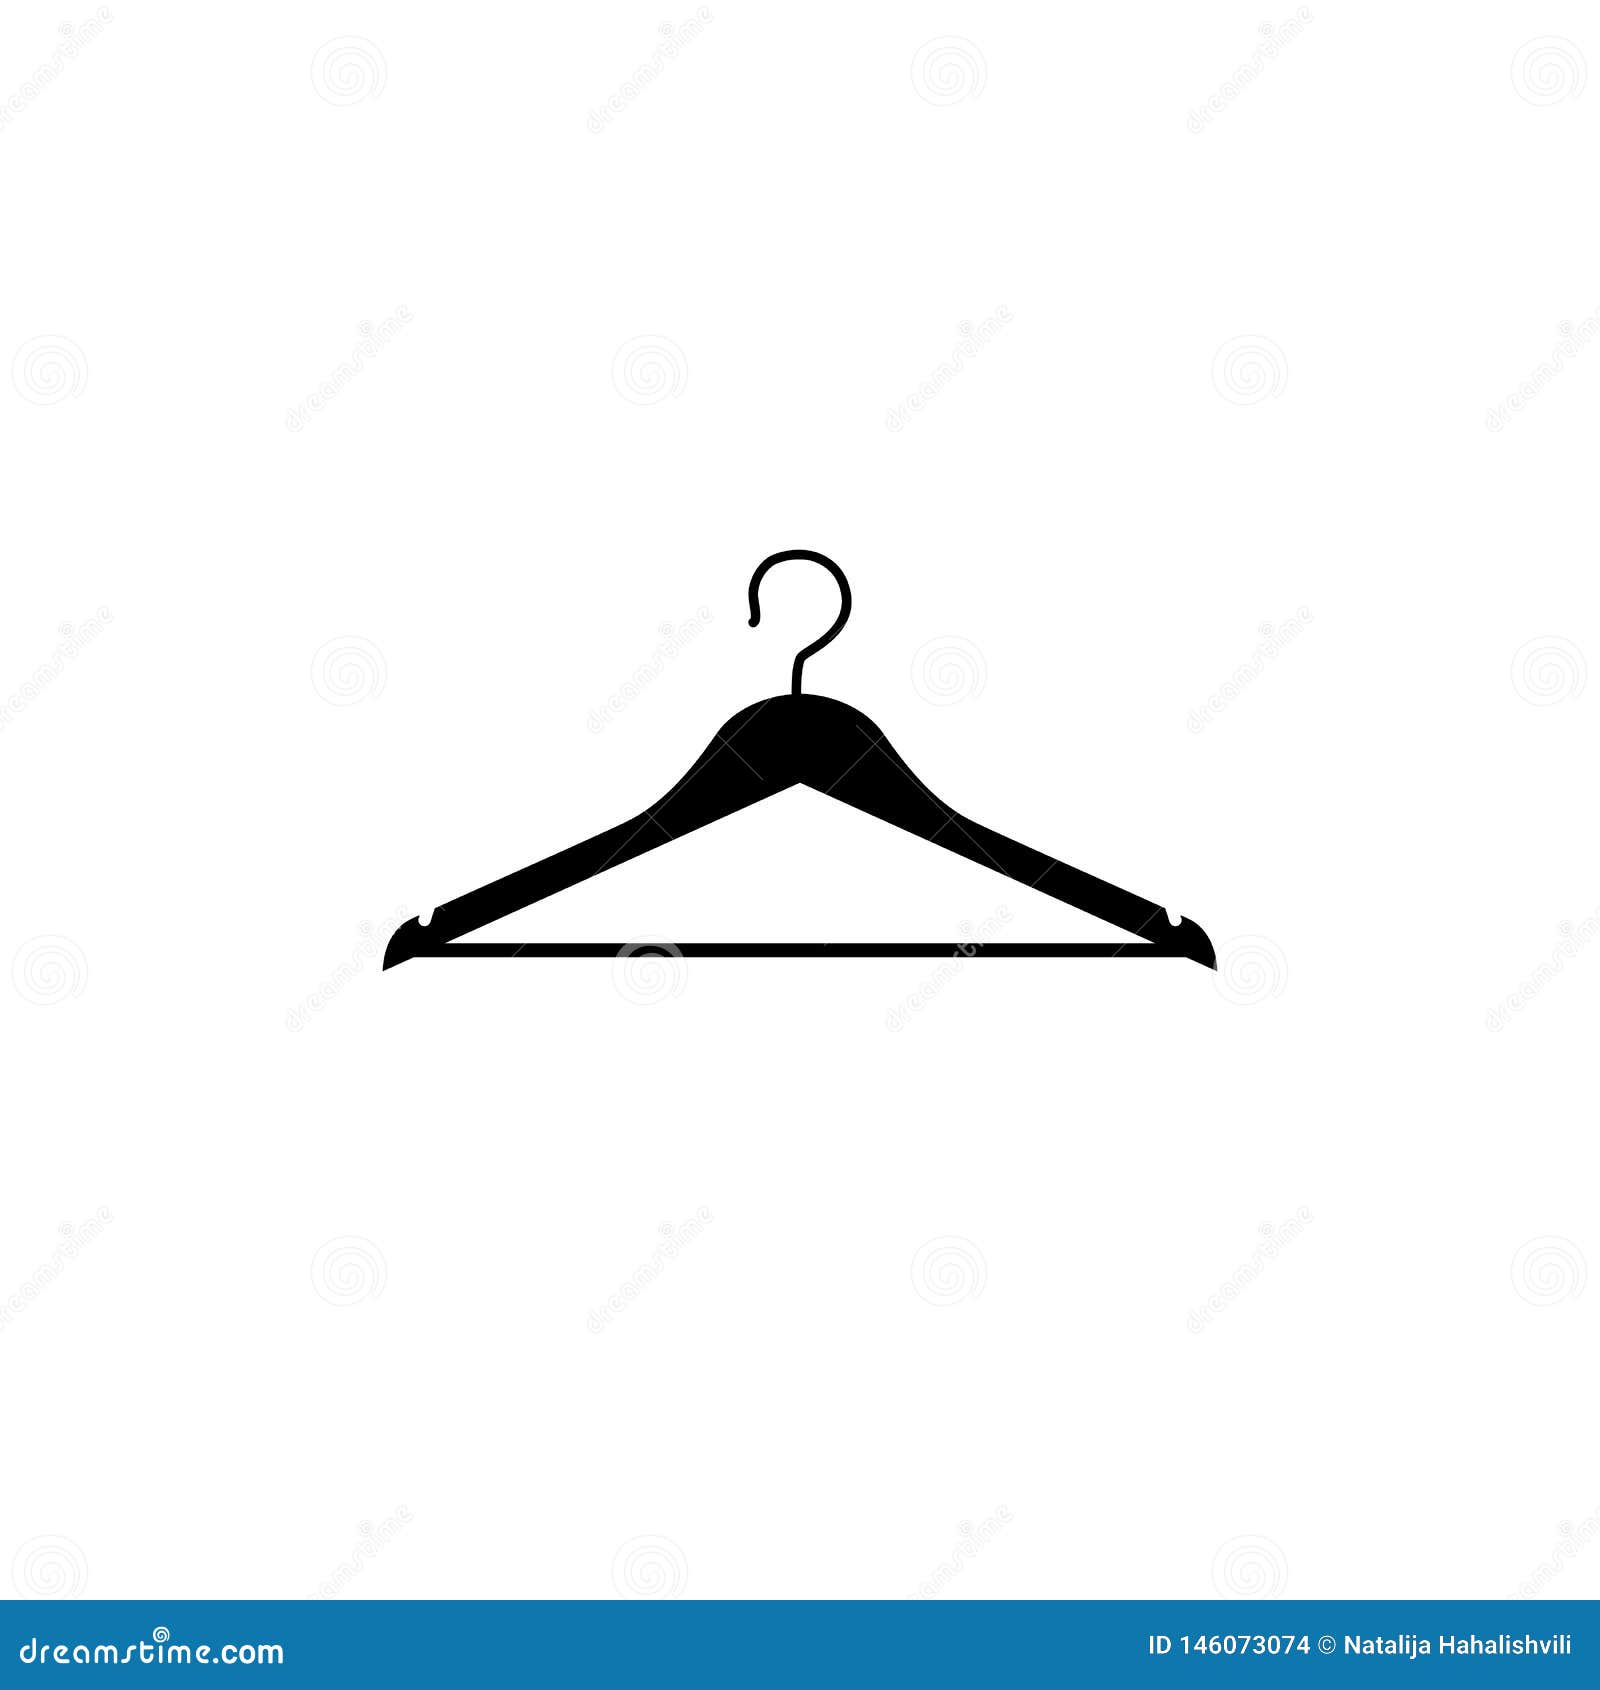 Clothes Hanger Icon Logo Template Isolated on White Background Regarding Wire Hanger Letter Template